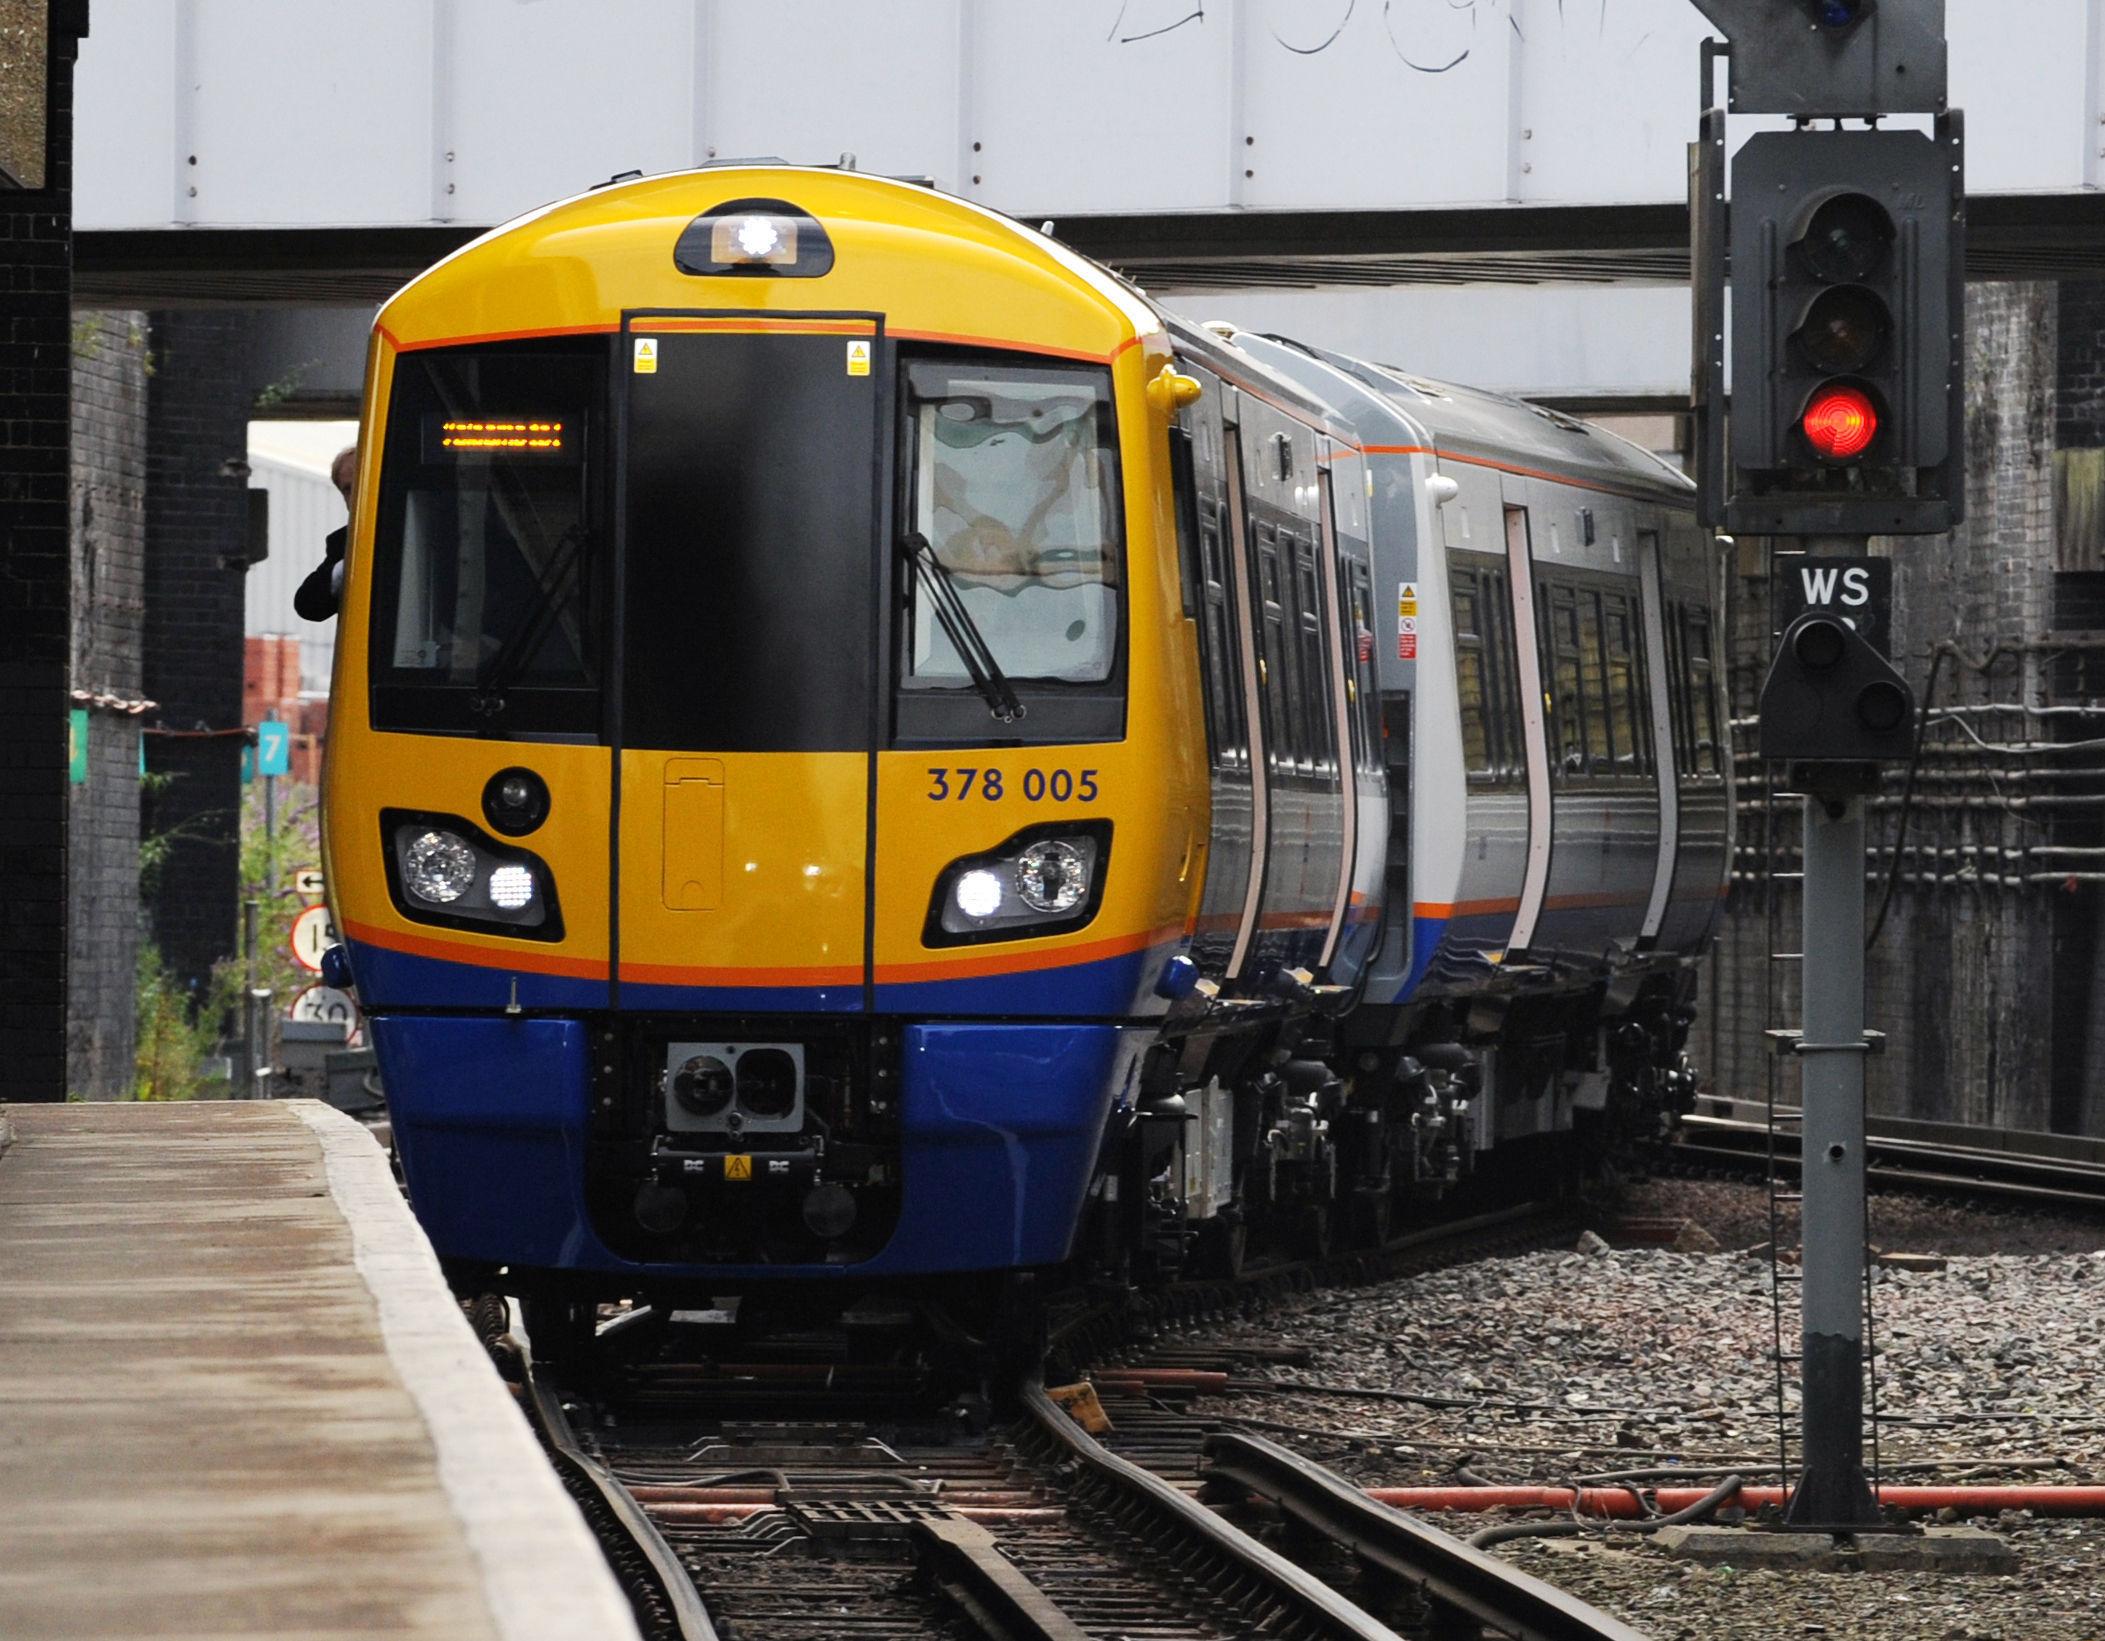 The incidents took place on a London Overground line in east London